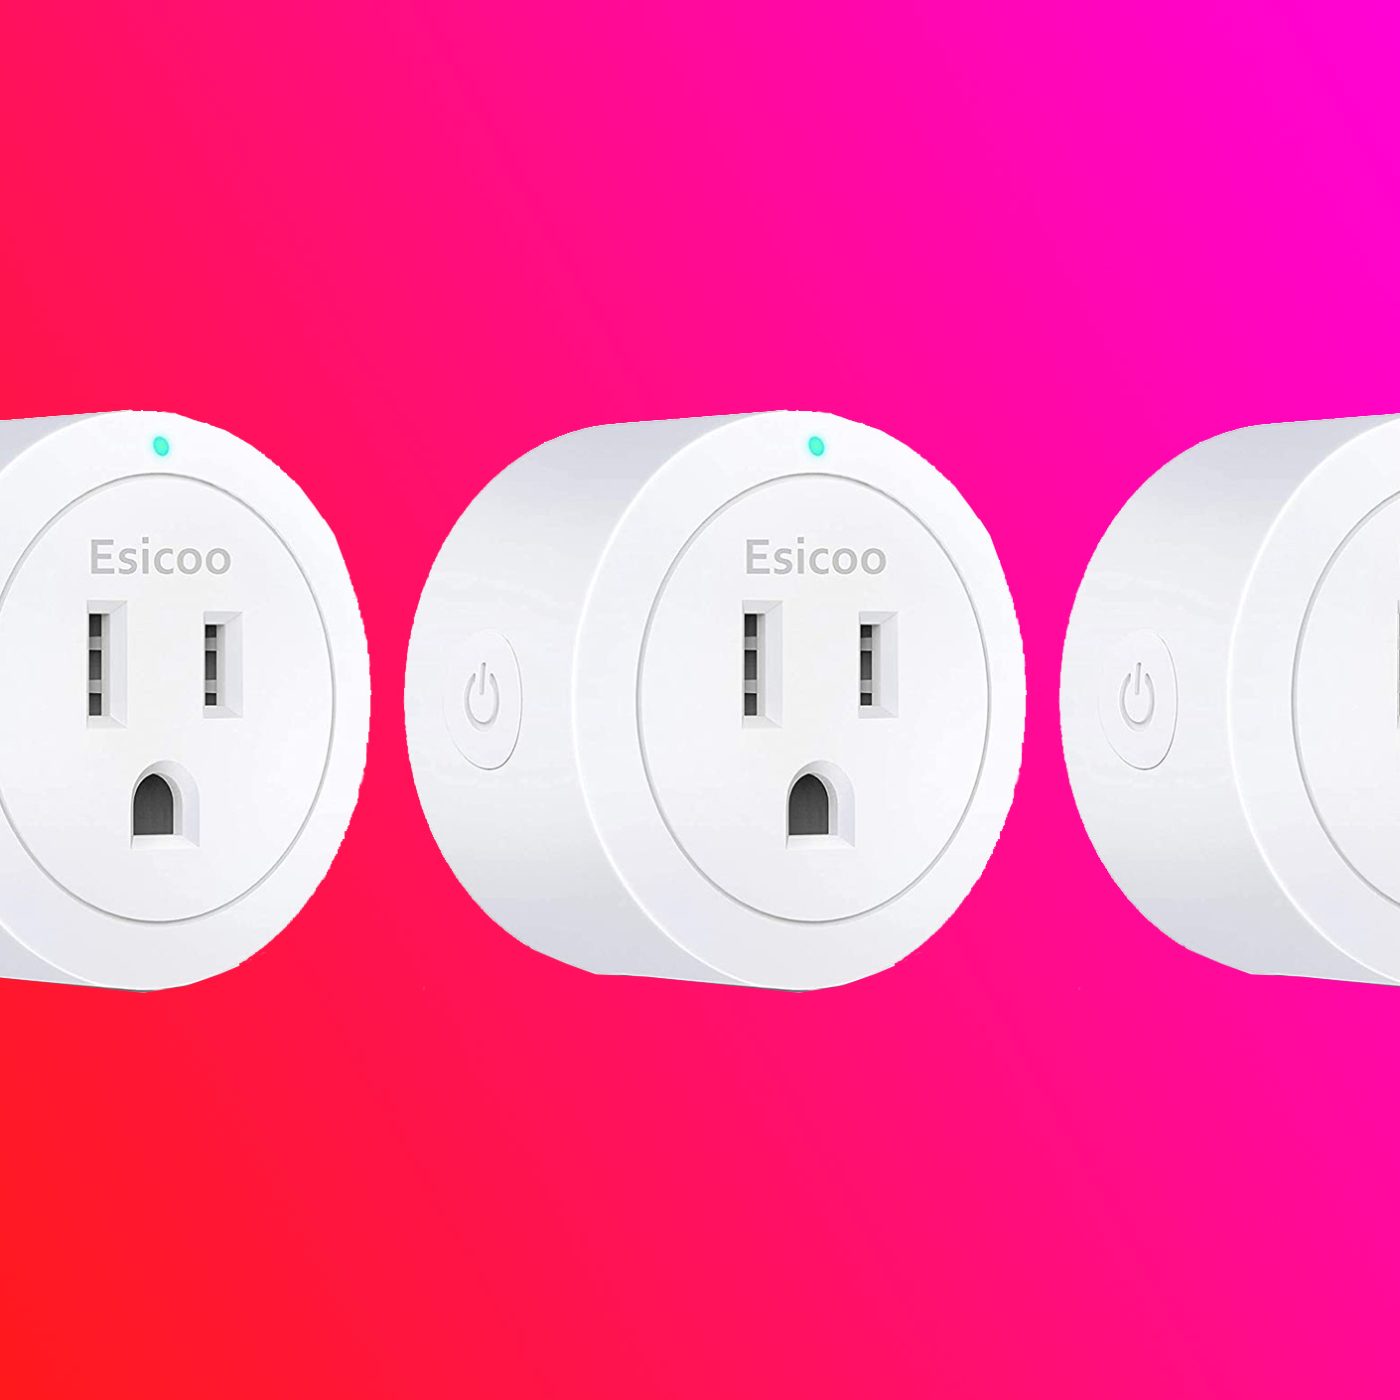 1 best-selling smart plugs are on sale for $4 each